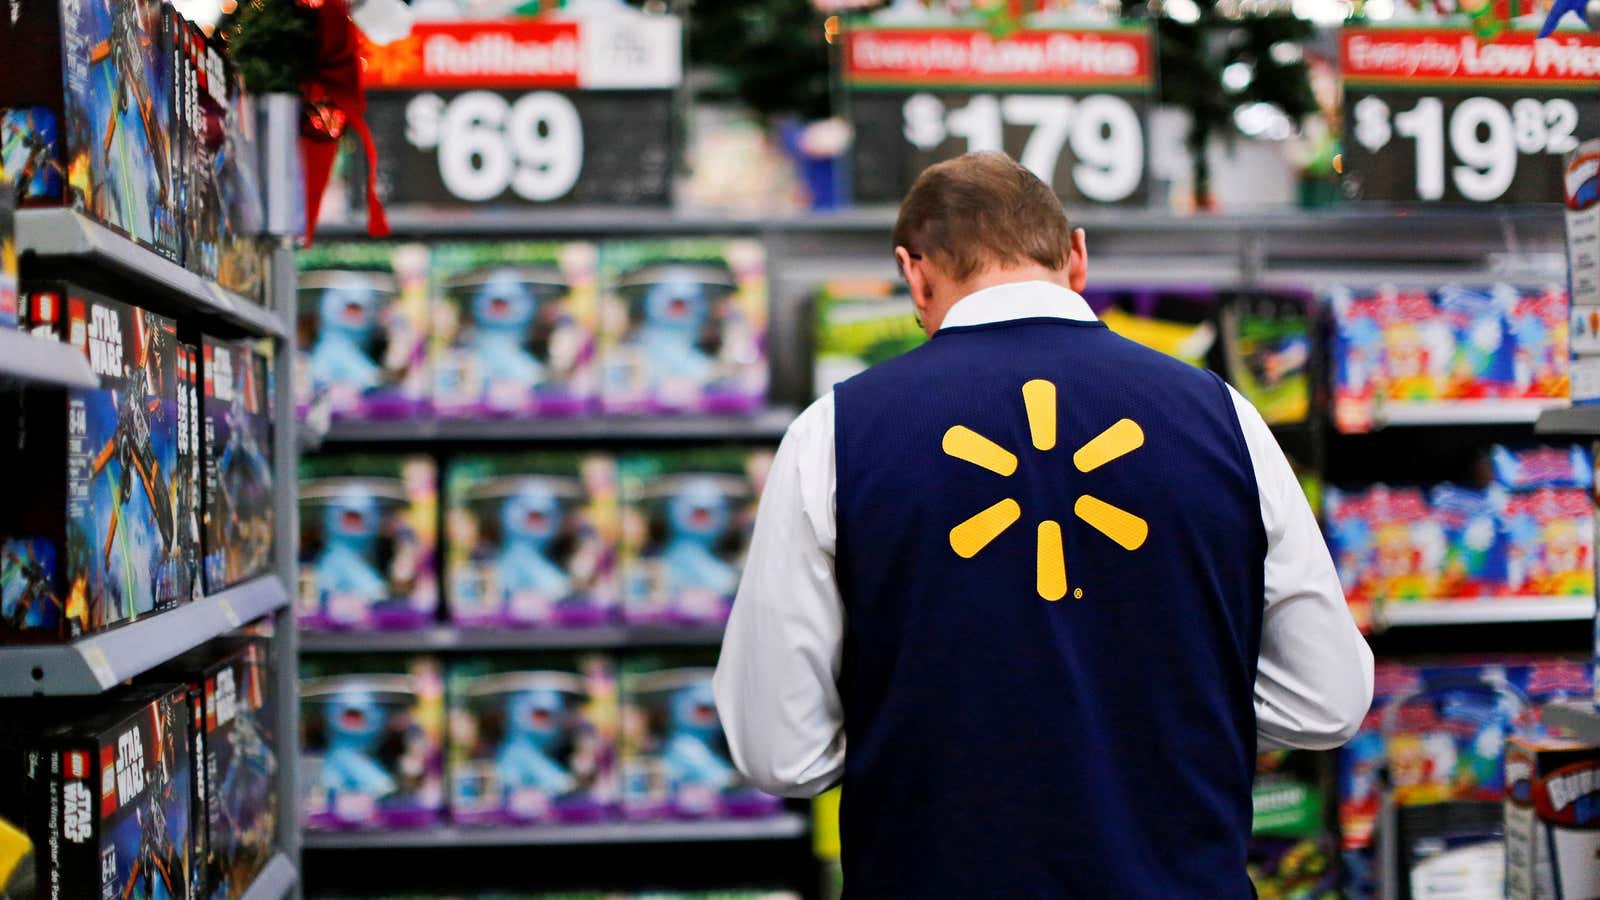 Walmart leaders quickly learned that the absence of a credible sustainability standard hampered their ability to market new products.